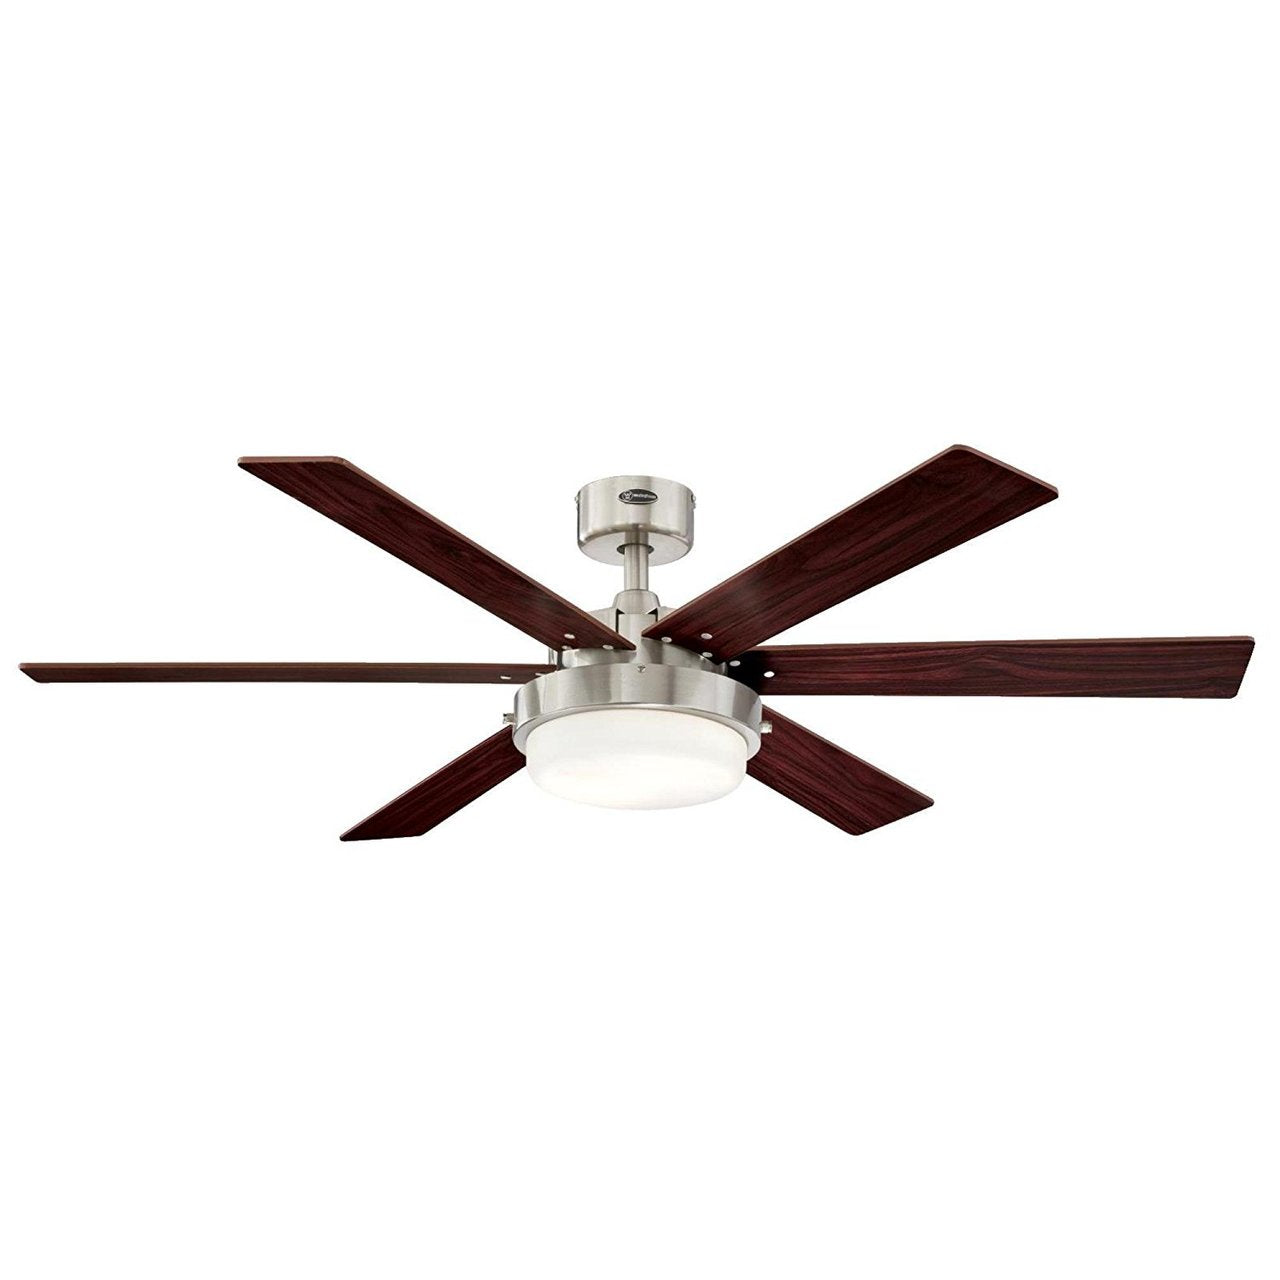 Westinghouse 7205100 Contemporary Alloy II 52 inch Brushed Nickel Indoor Ceiling Fan, Led Light Kit with Opal Frosted Glass